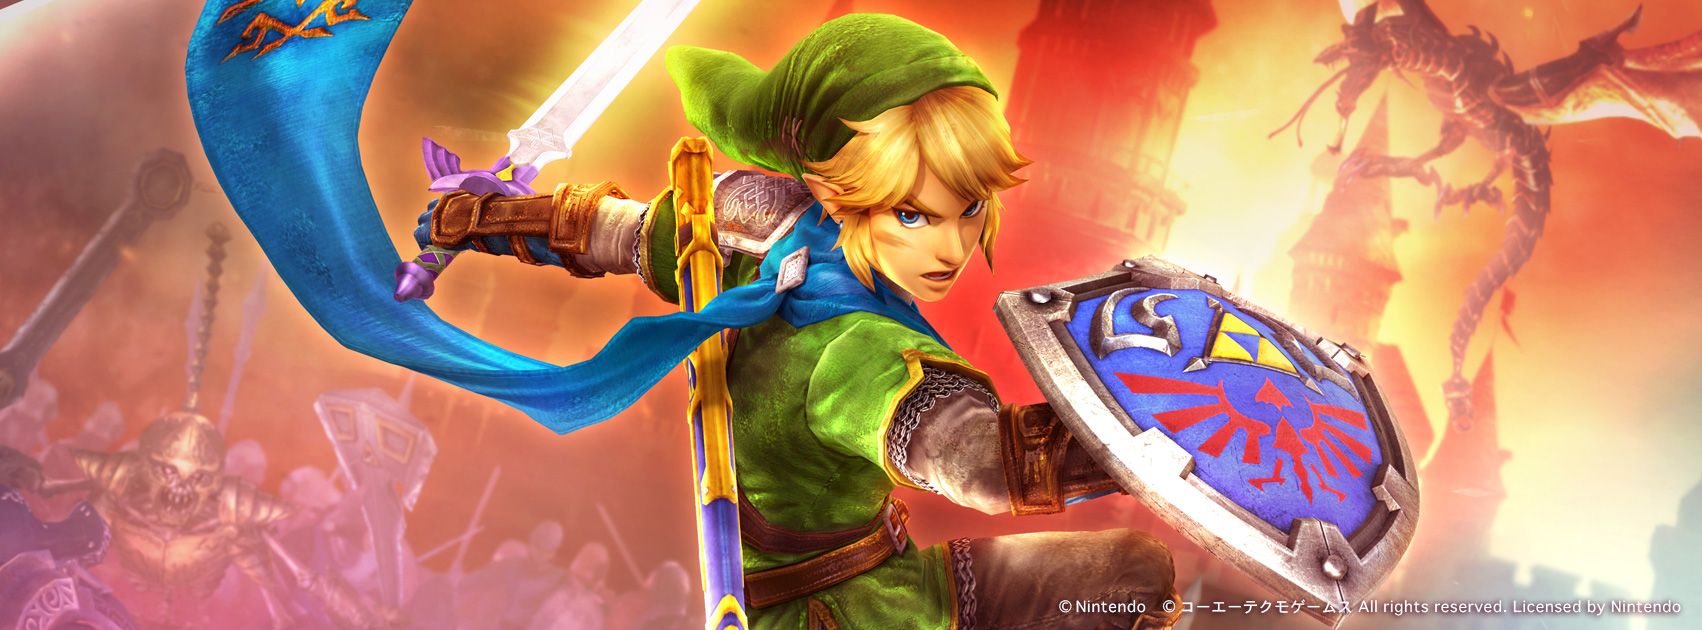 Hyrule Warriors Definitive Edition Characters - HD Wallpaper 